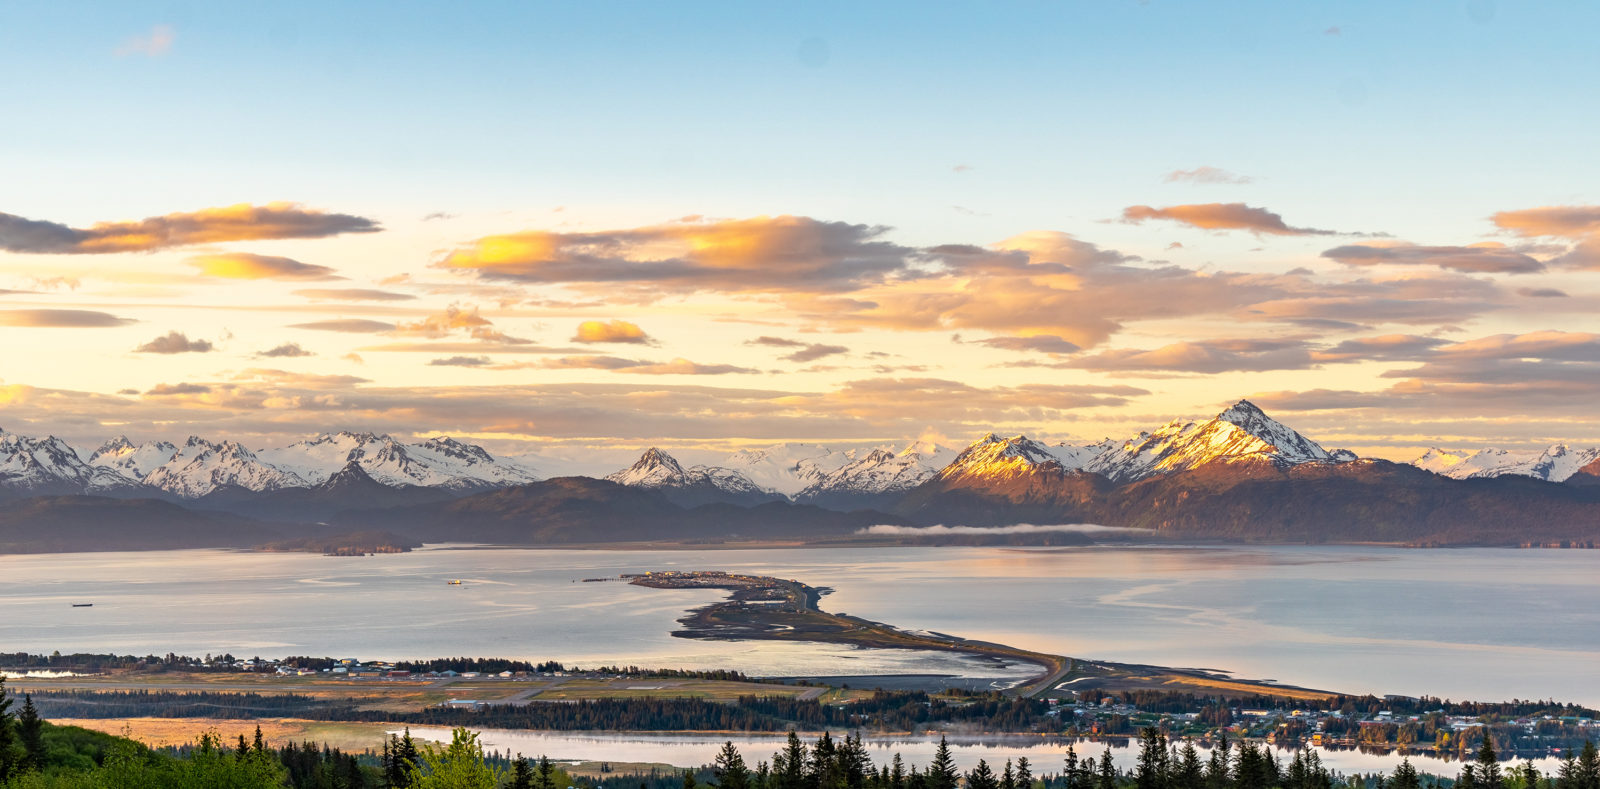 Homer Spit and Kachemak Bay as viewed from the top of Saddle Mountain. Kachemak Bay State Park, in the background provide access to hiking, backpacking and water sport.